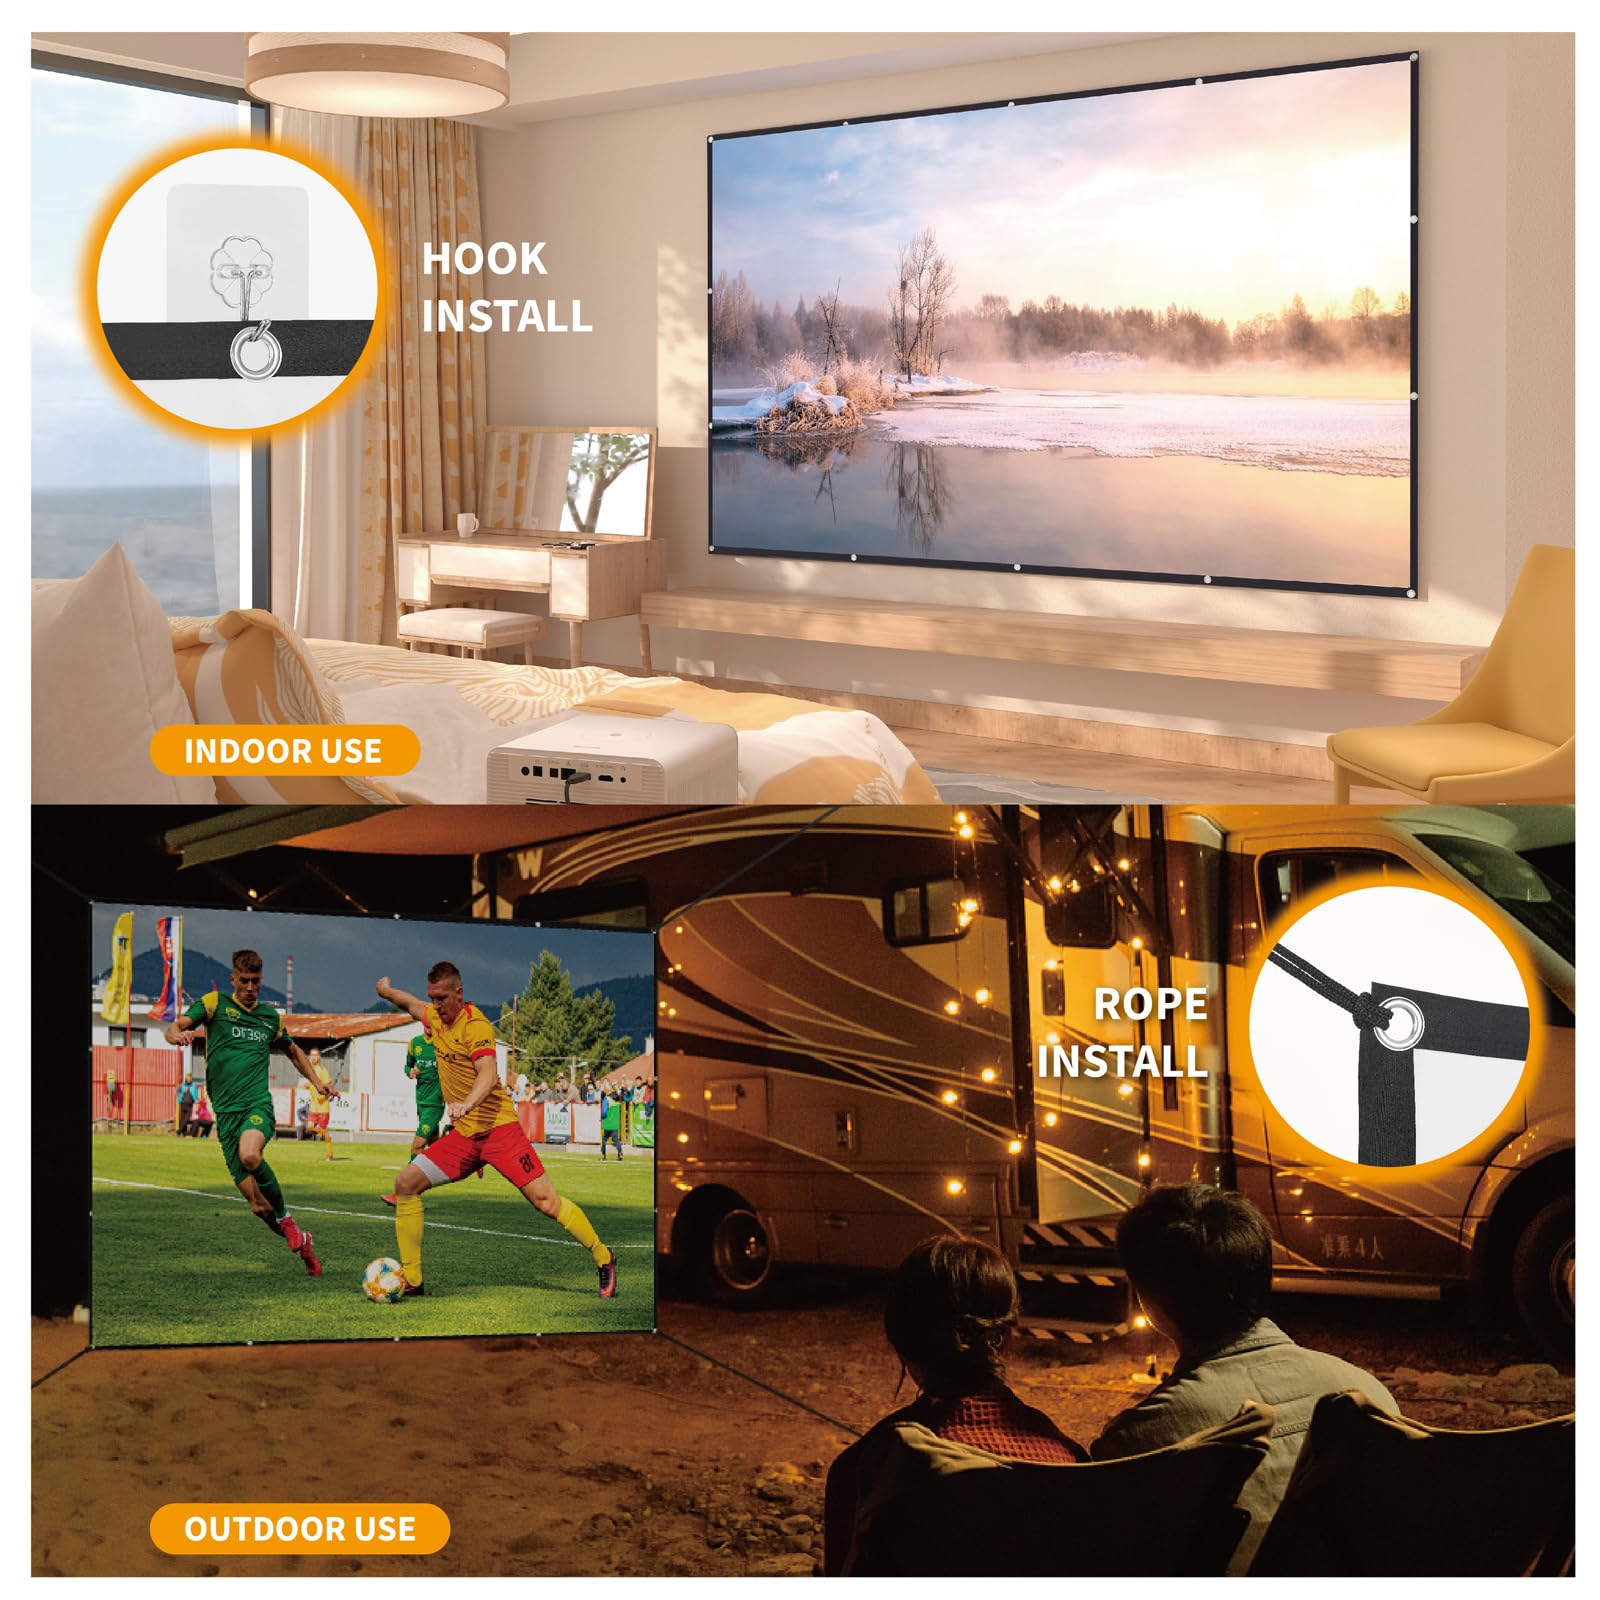 Portable Projector Screen, 120 inch, 16:9, Outdoor Projector Screen, Front and Rear Projection Screen, Foldable, Ironable and Washable, Idea for Home Cinema, Business, Backyard Party, Game.